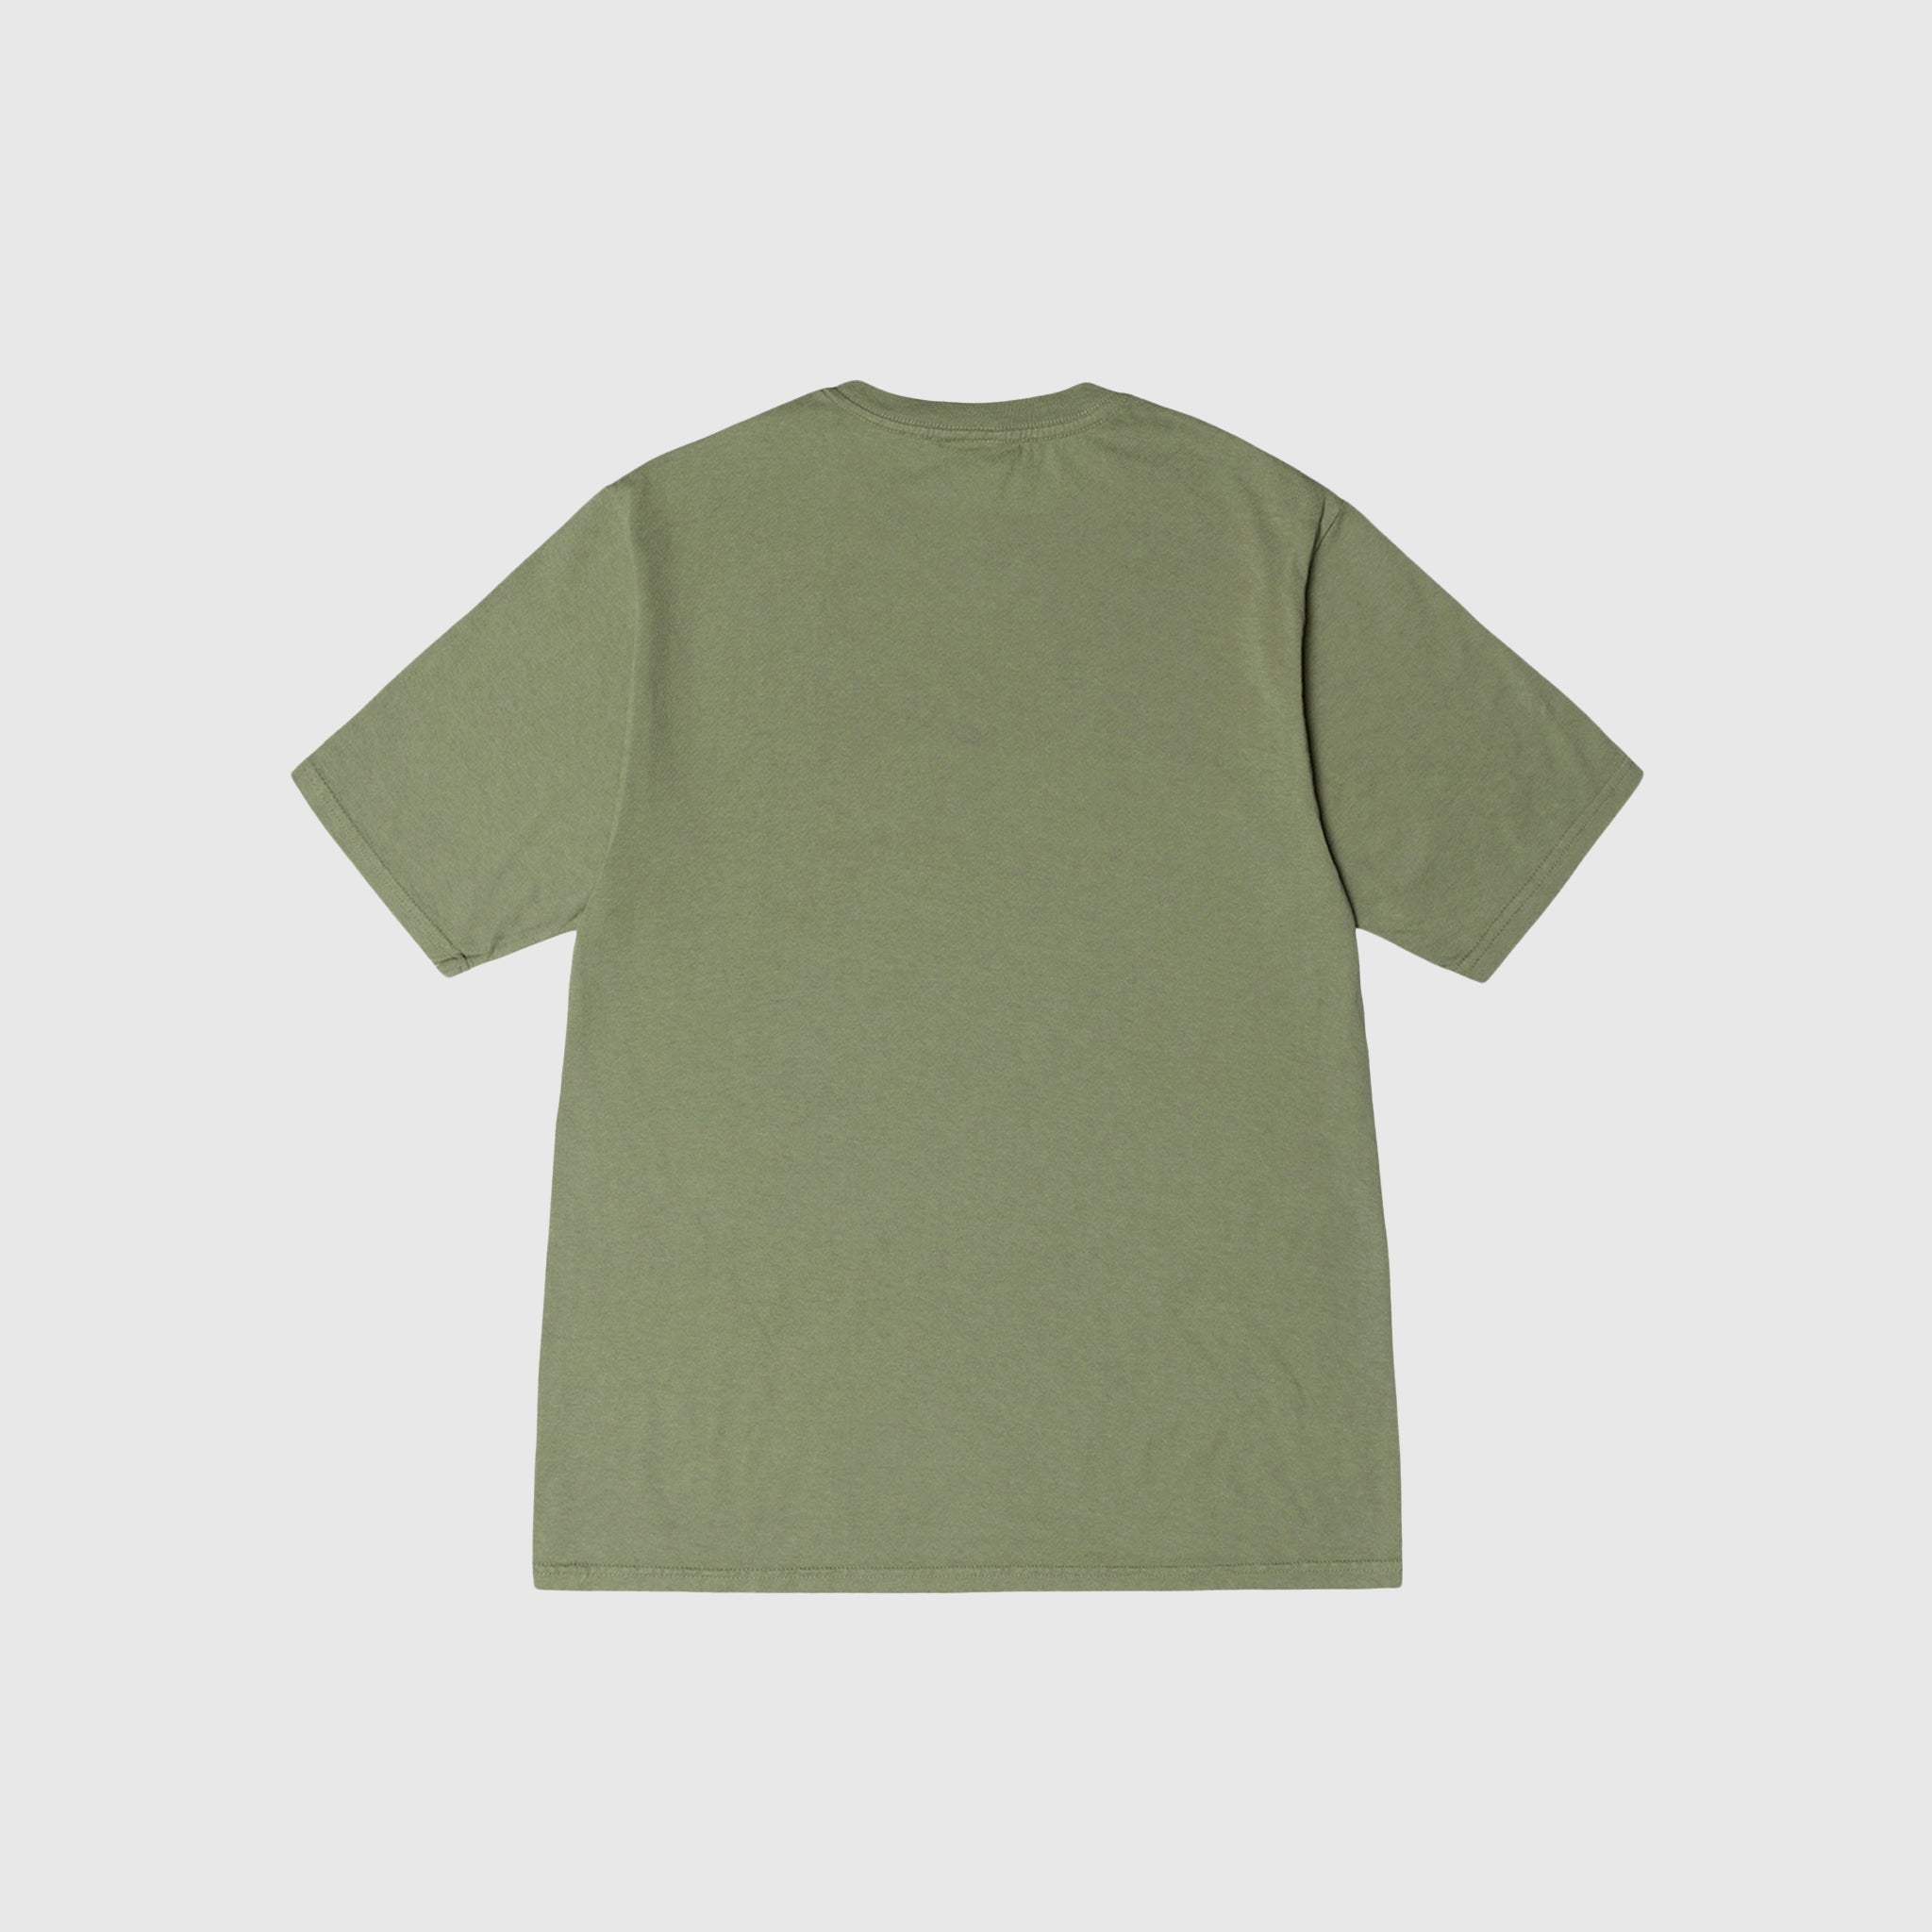 S64 PIG. DYED S/S T-SHIRT – PACKER SHOES